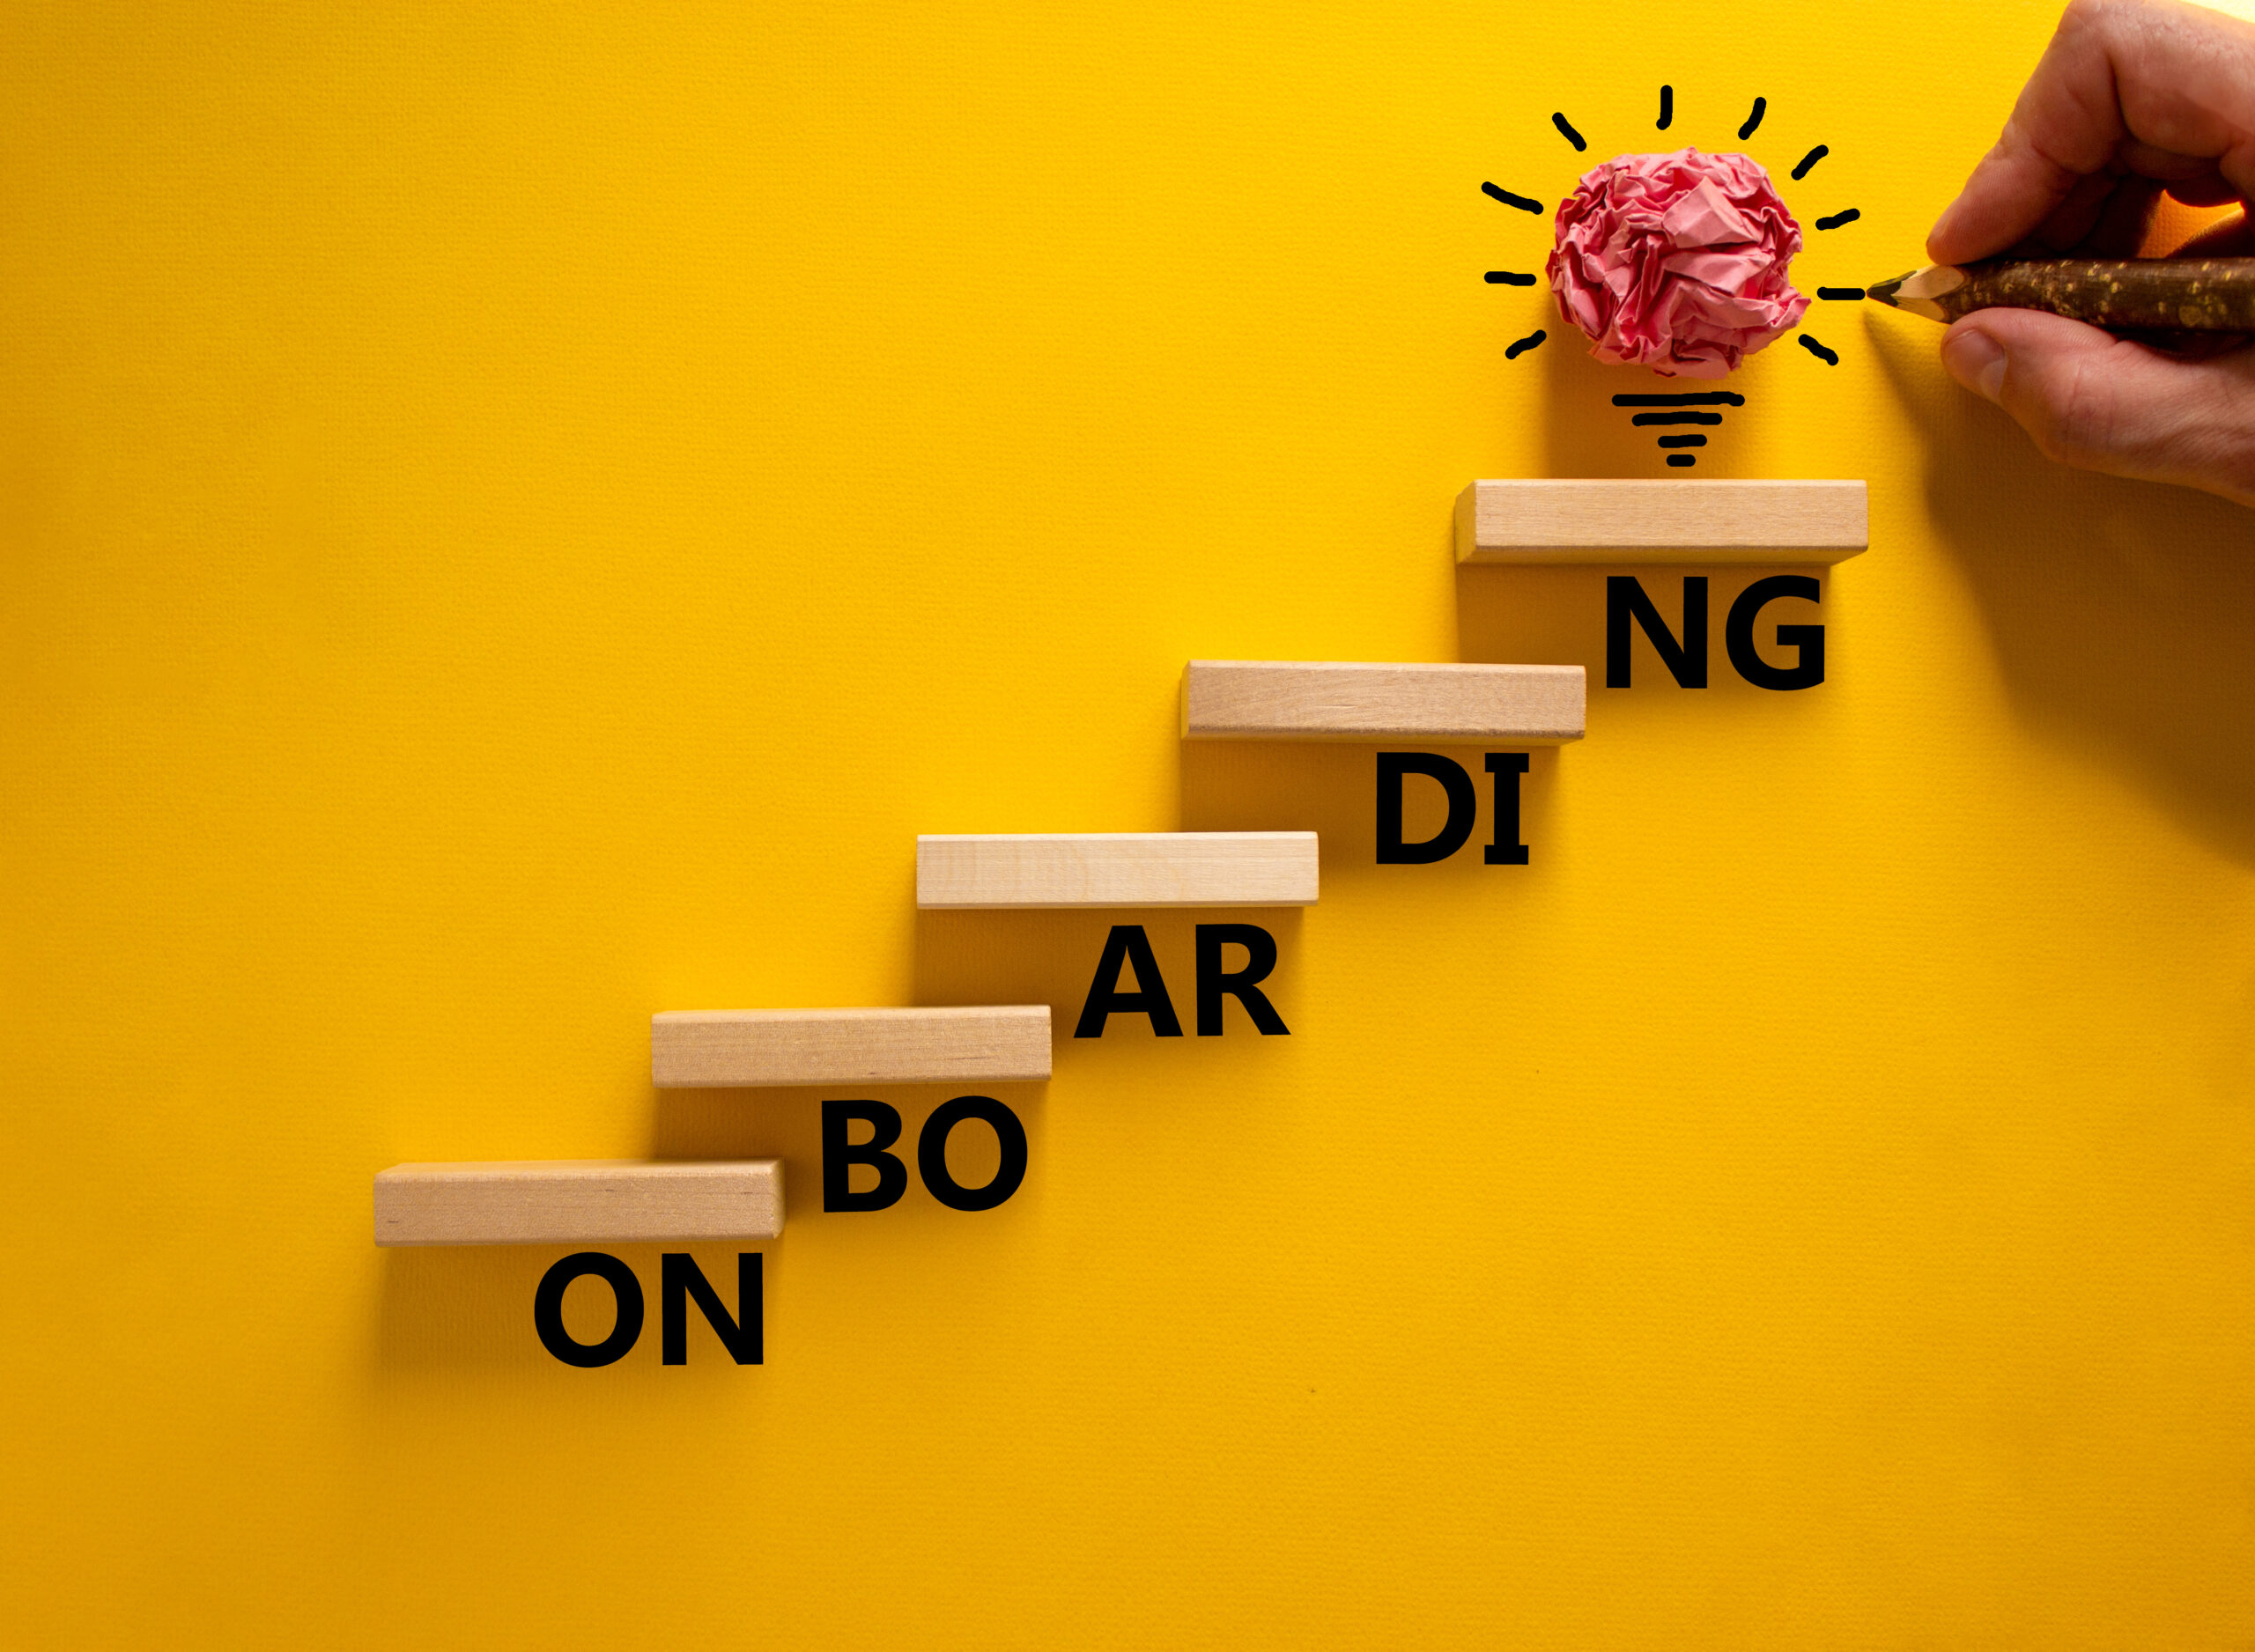 Crumpled pink paper lightbulb idea above wooden staircase with partial words, symbolizing ServiceNow onboarding strategy.